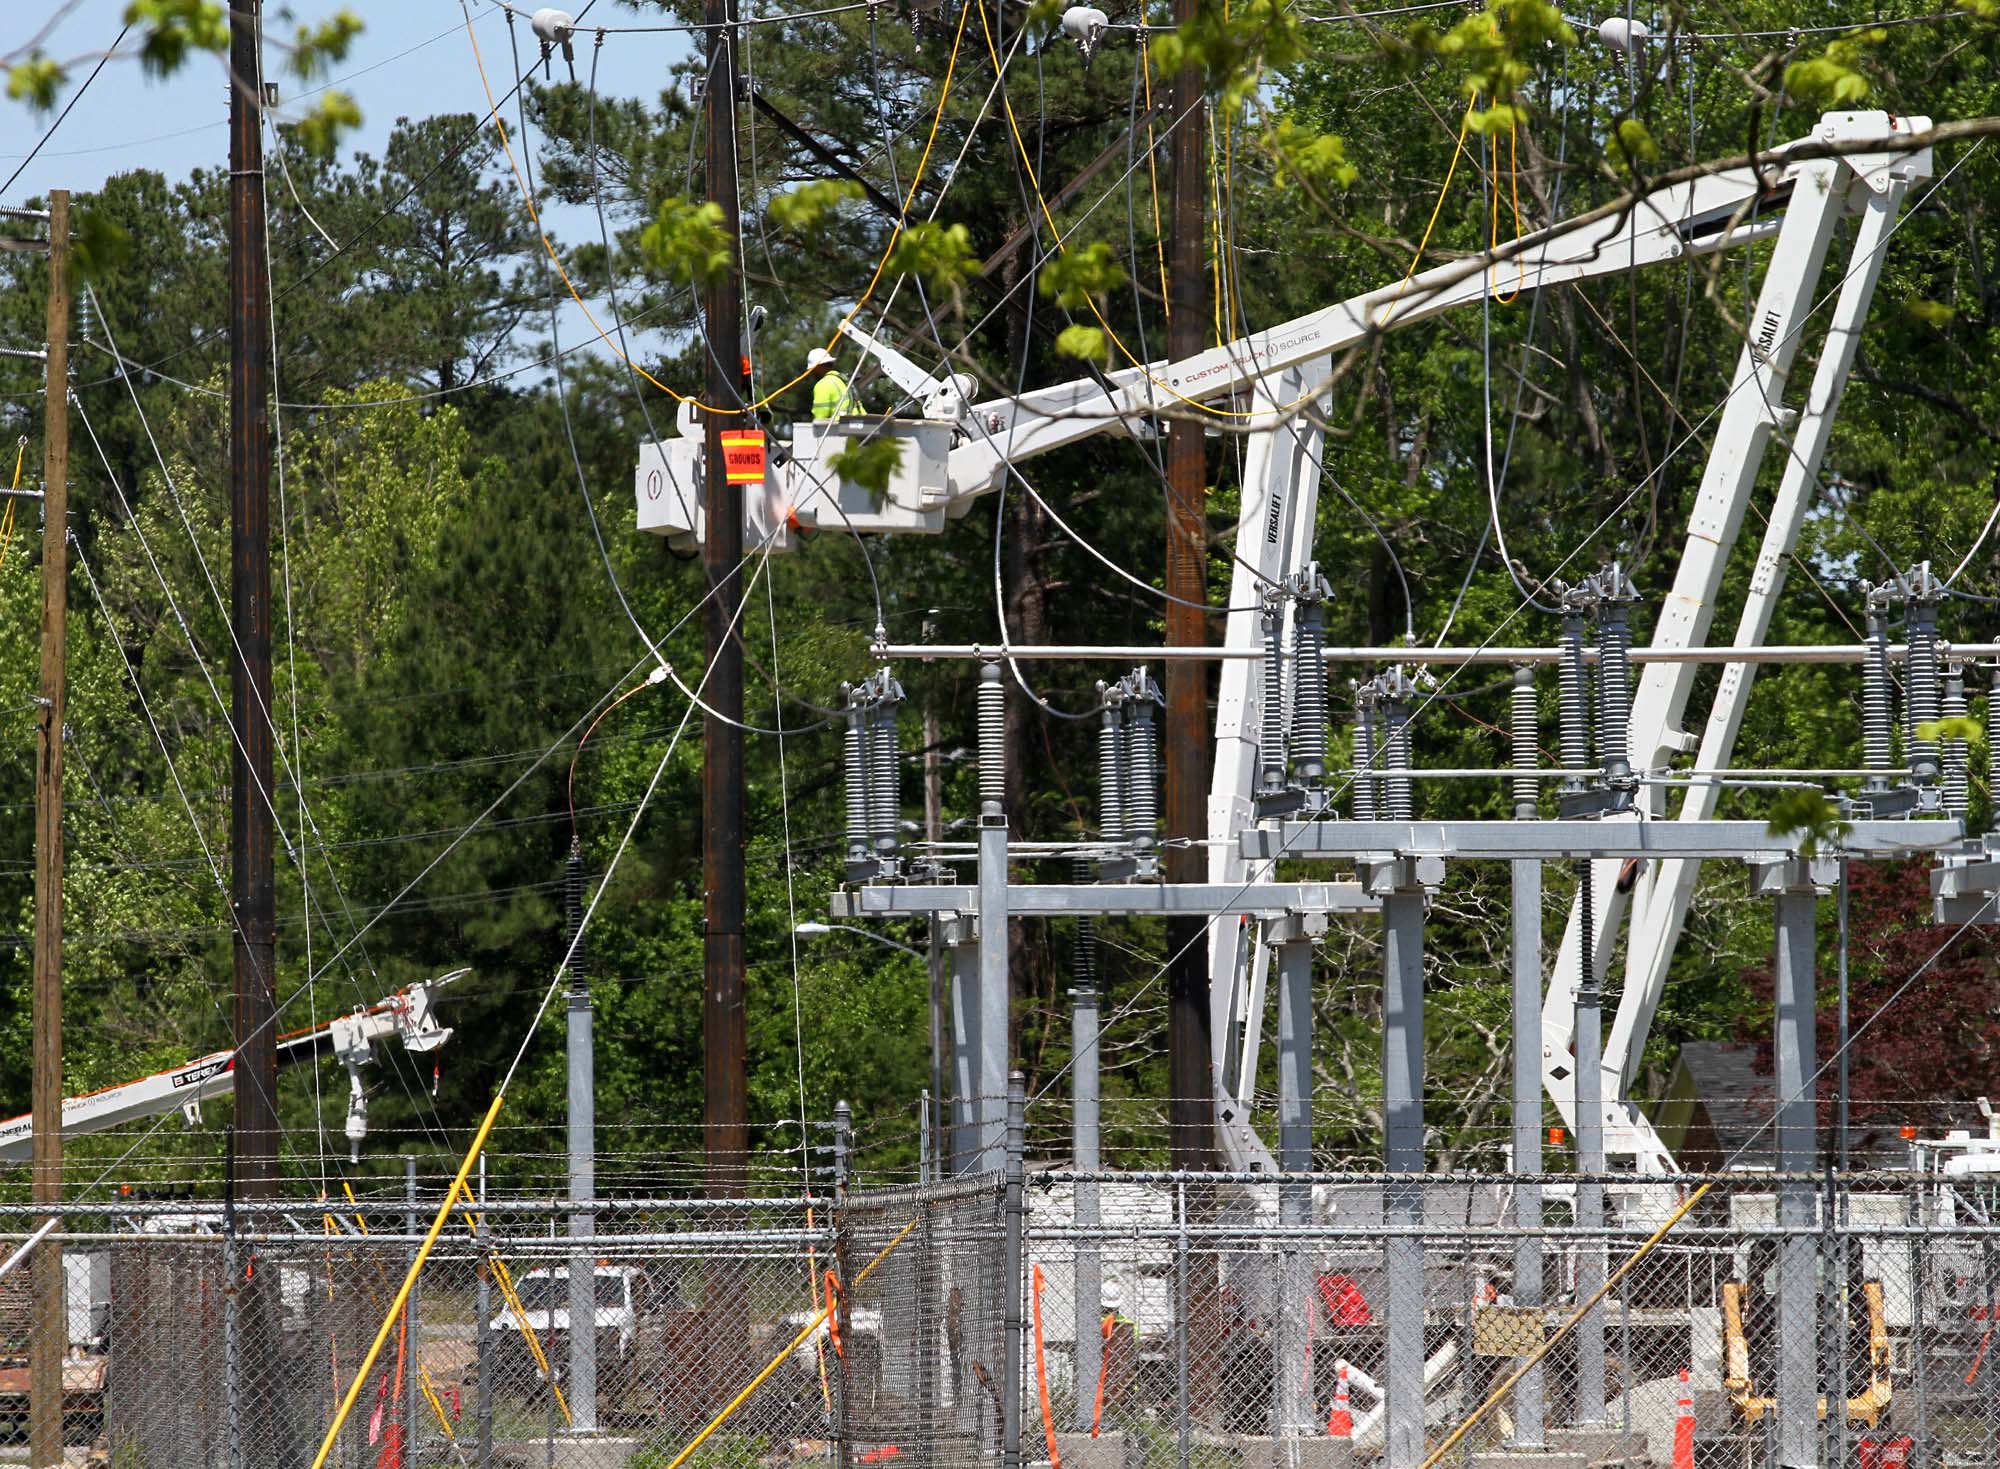 Duke intends to use revenue from the increased rates to improve the state's power grid and make it more resilient to storm damage and other weather-related impacts.